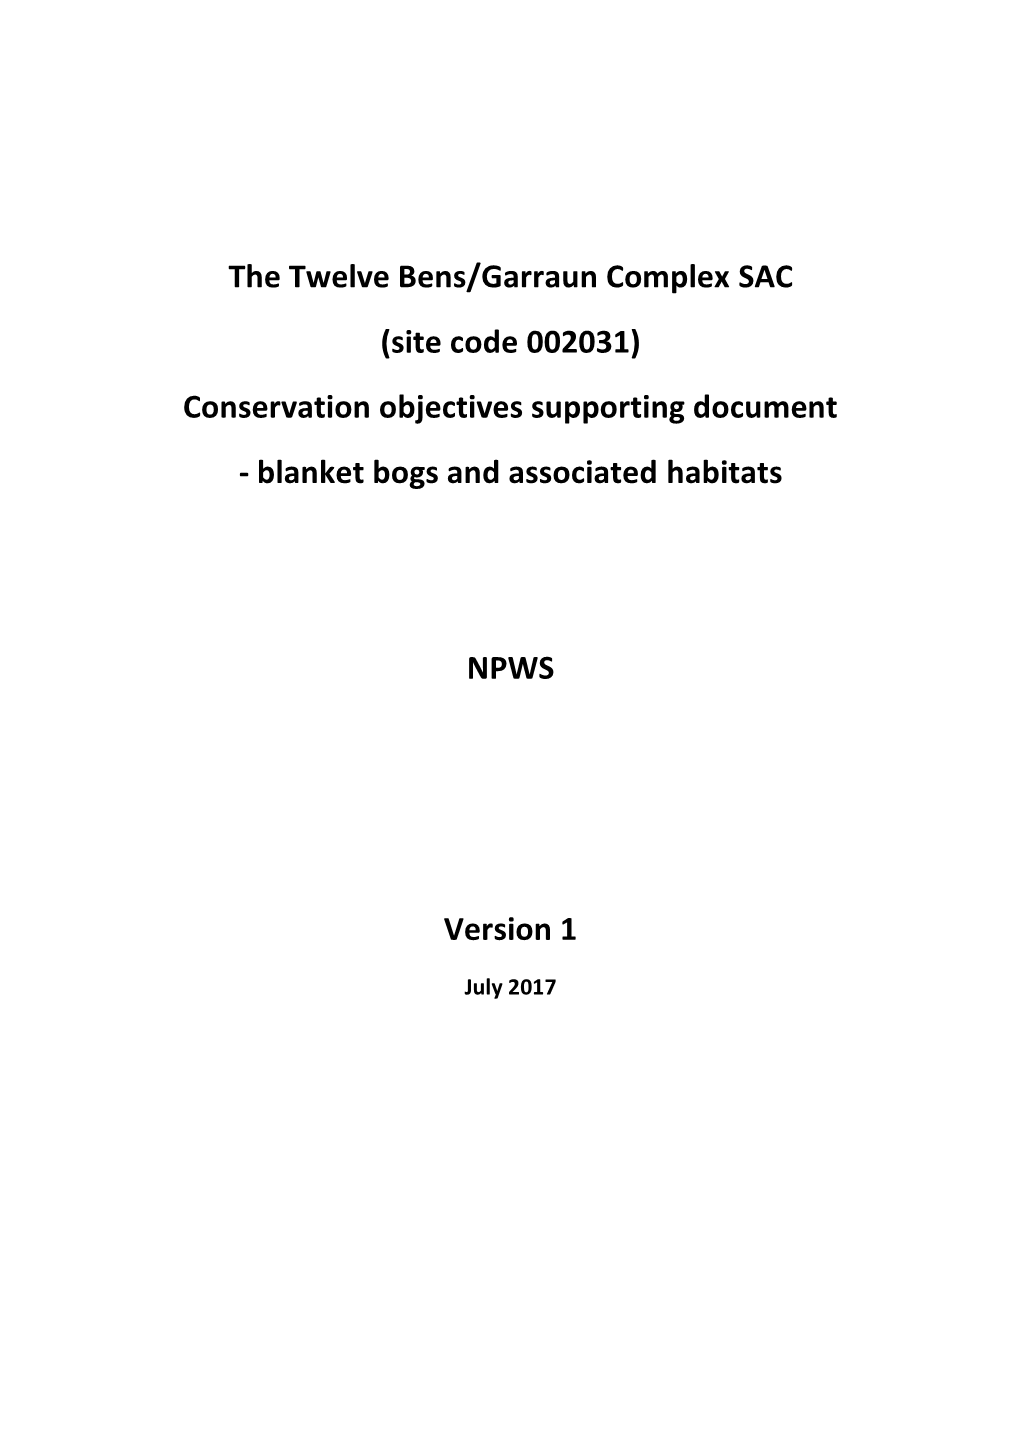 The Twelve Bens/Garraun Complex SAC (Site Code 002031) Conservation Objectives Supporting Document - Blanket Bogs and Associated Habitats